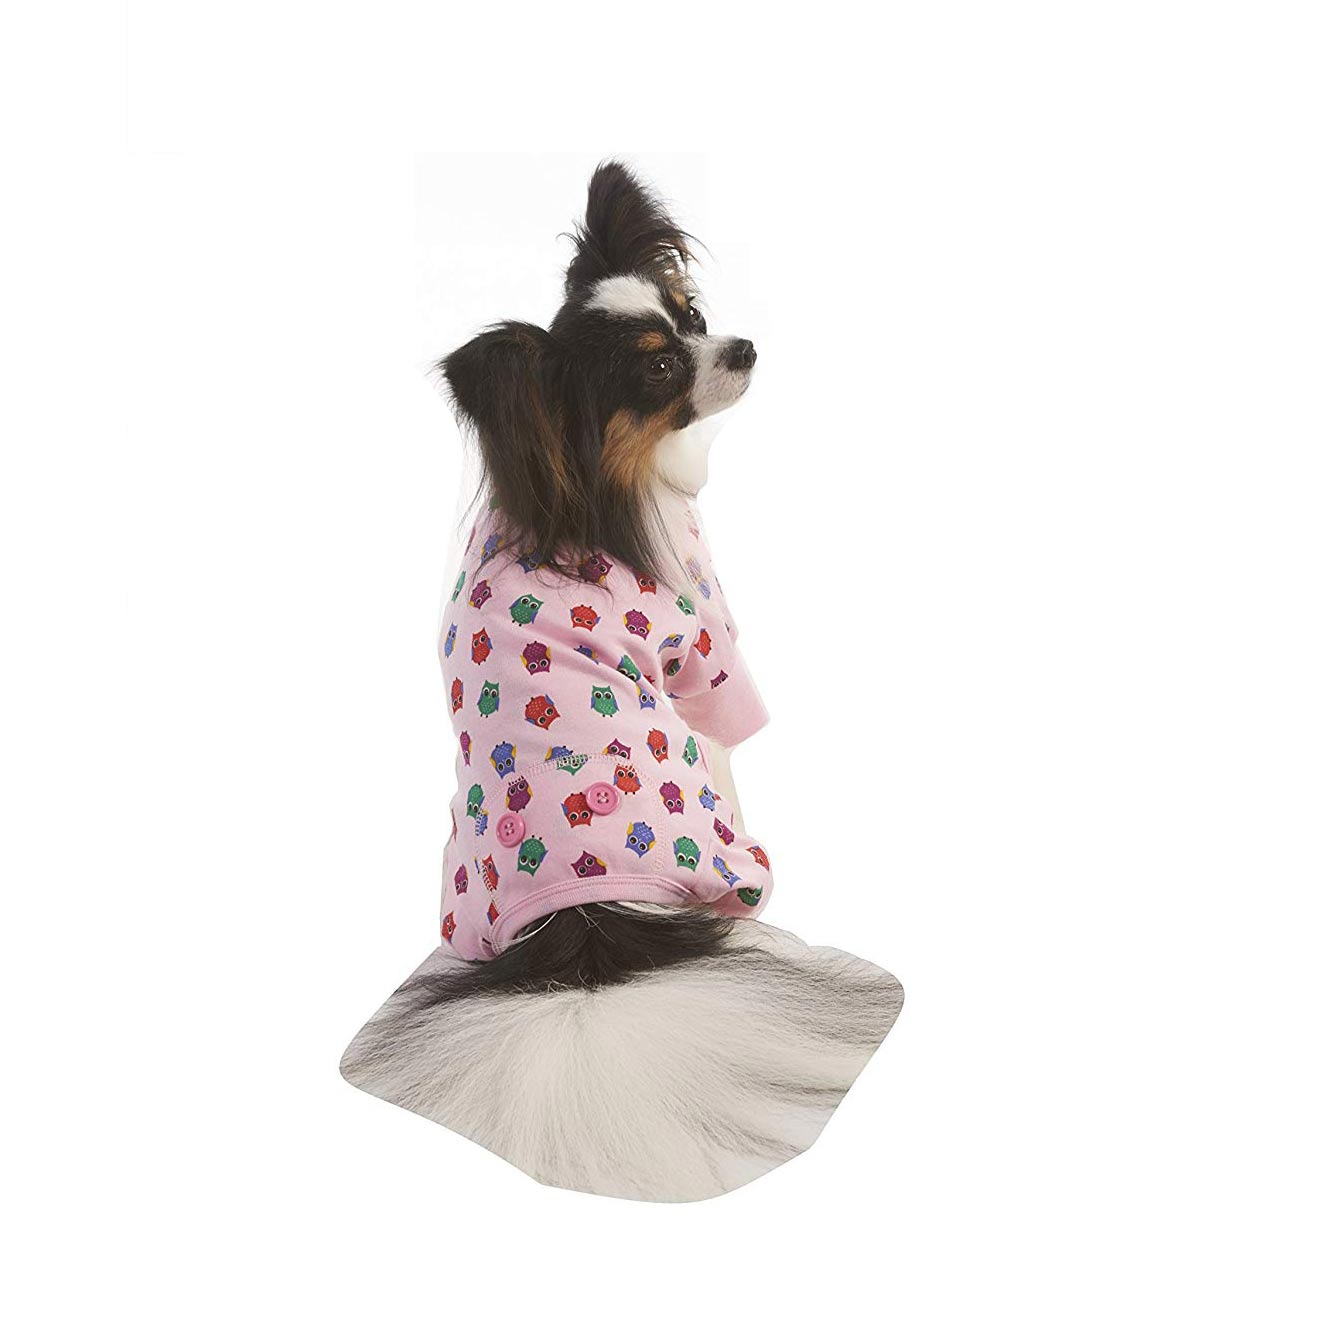 Ethical Products Inc.- XS Pink Owl Print PJ's <p> Snuggle up in these cozy